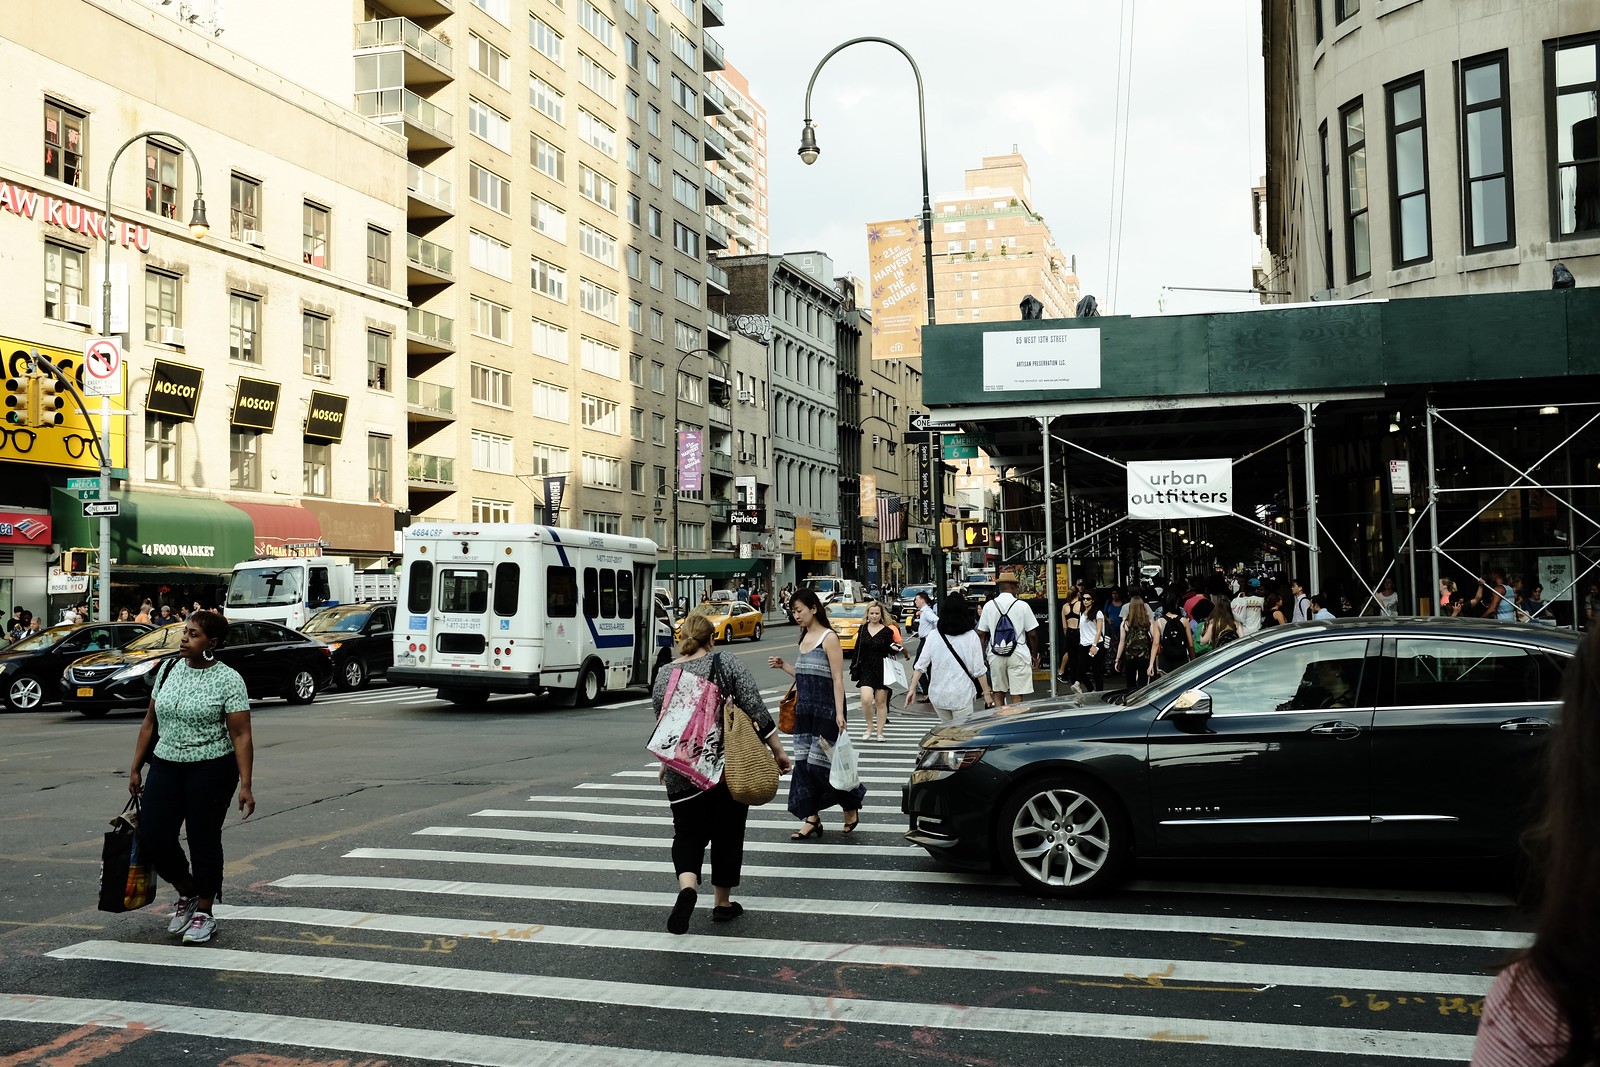 The NEW YORK by FUJIFILM X100S.